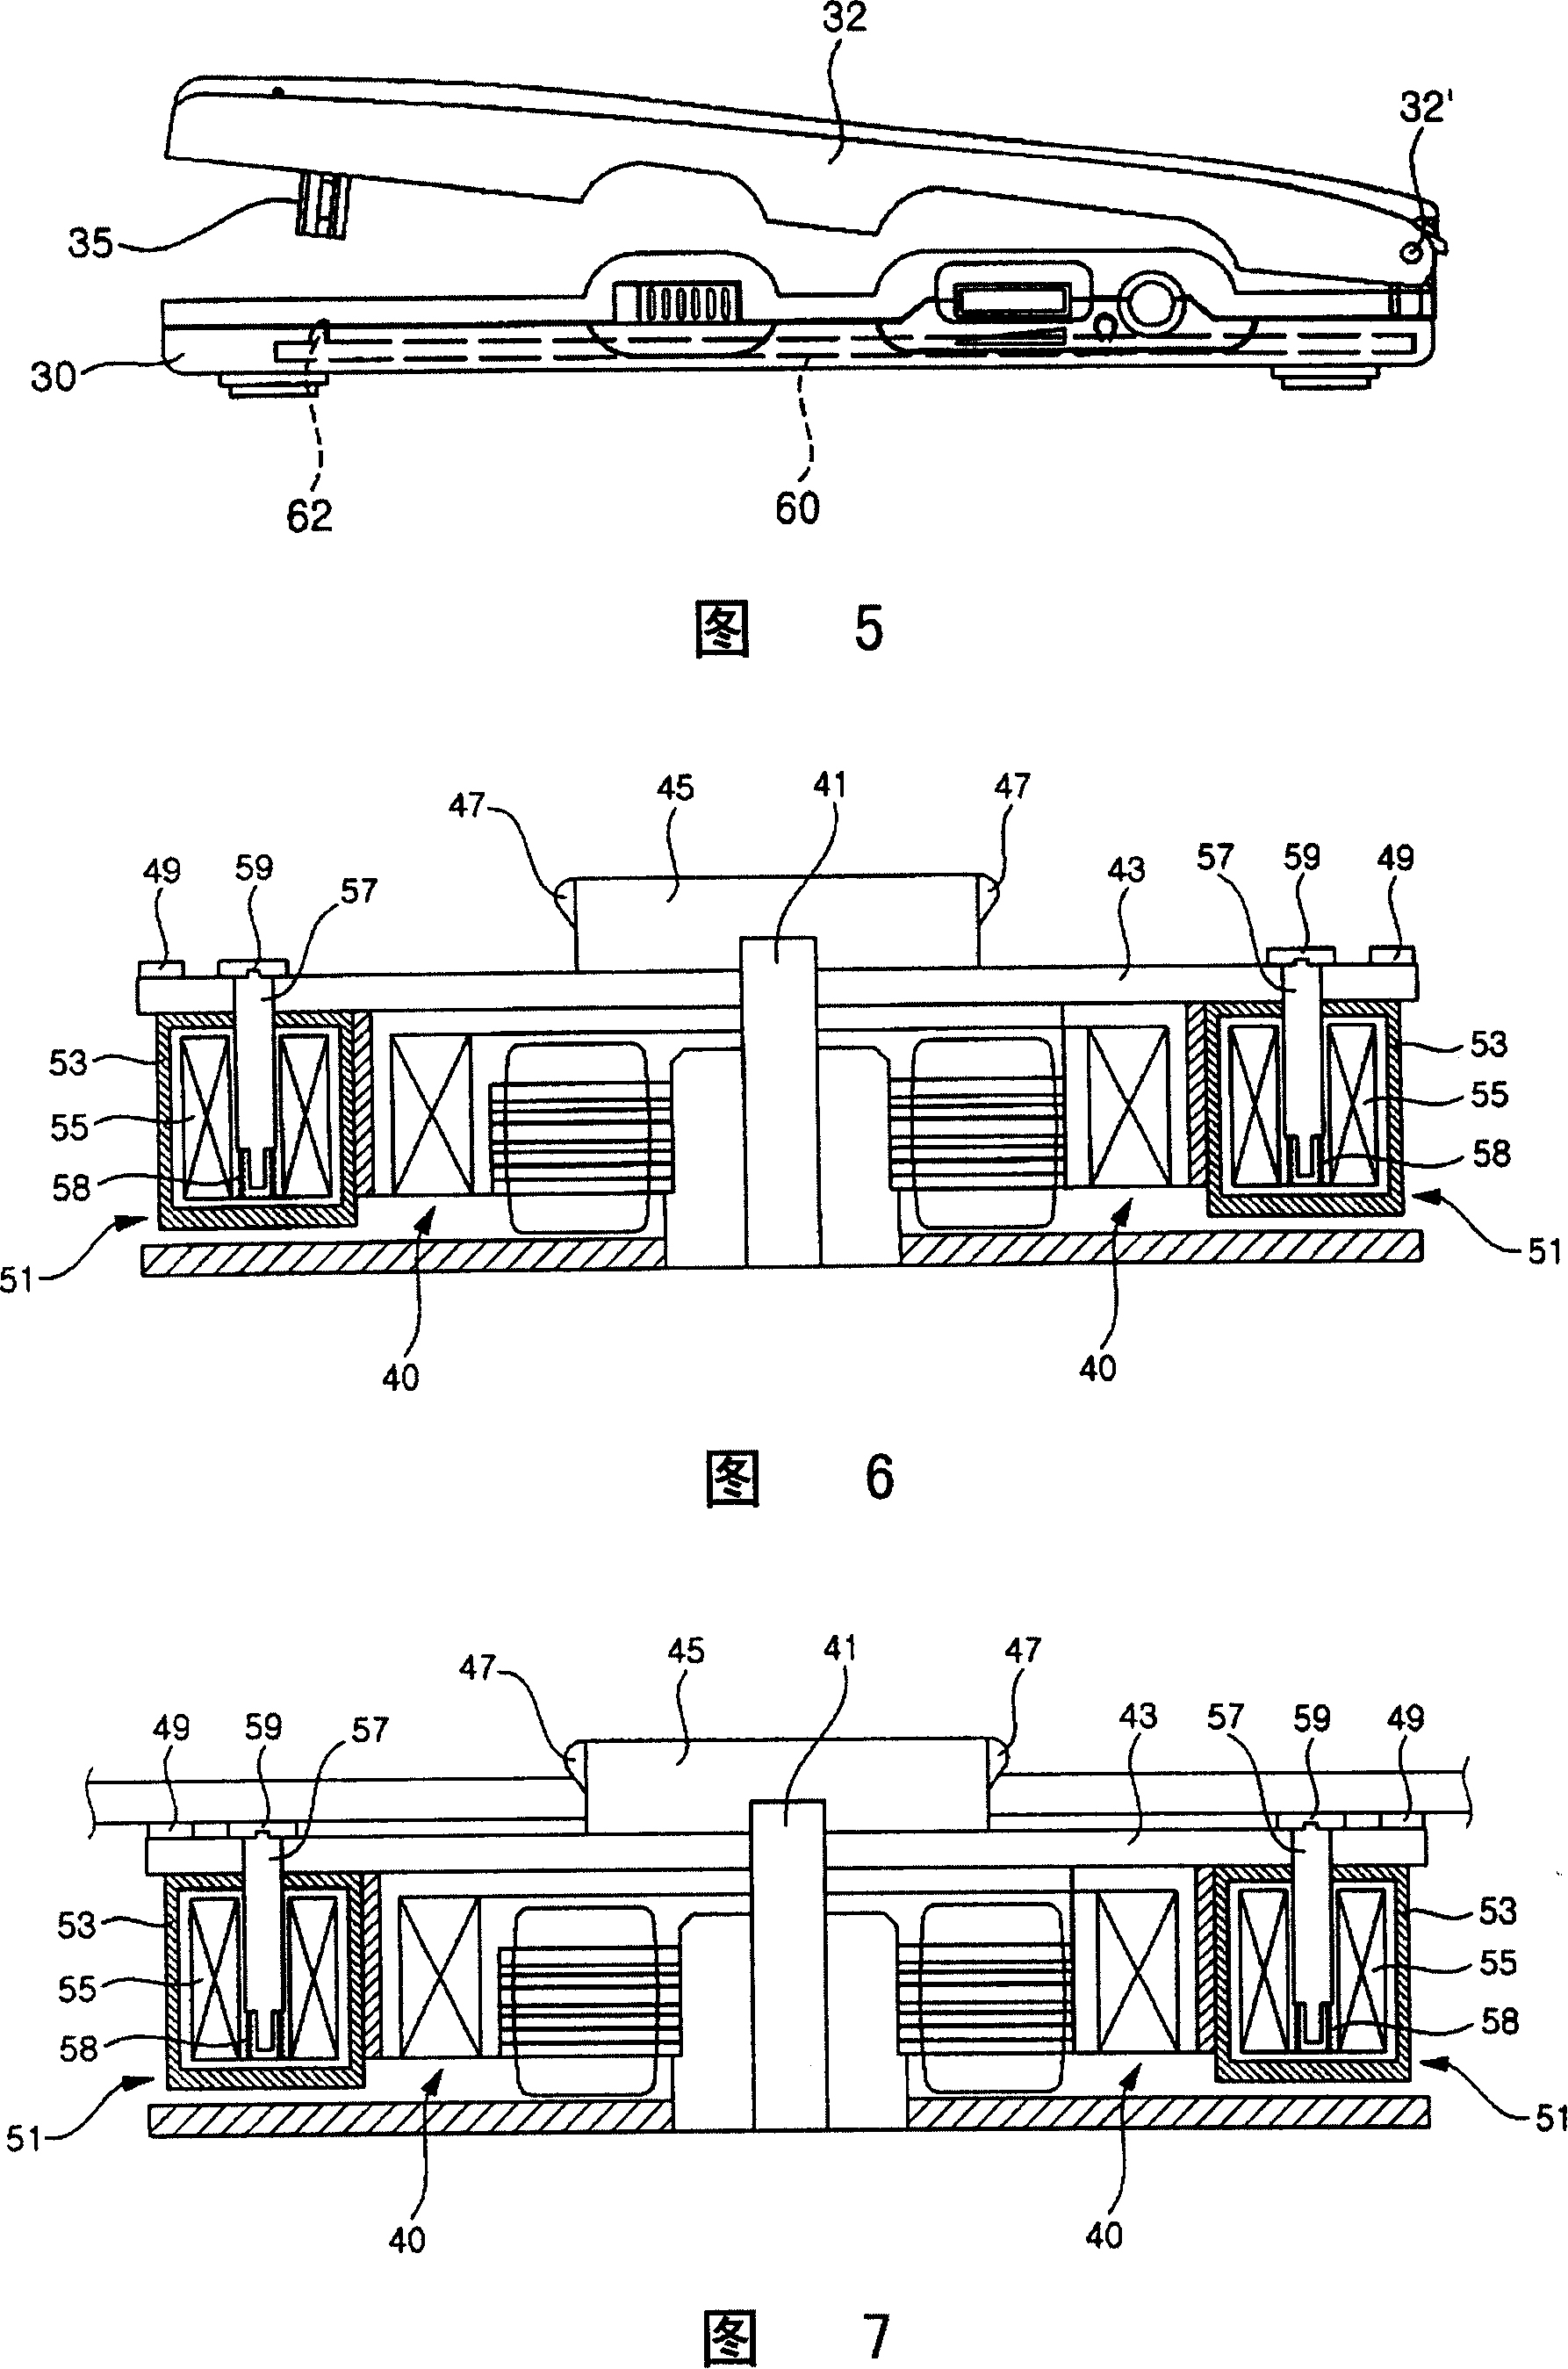 CD separating device for CD driver